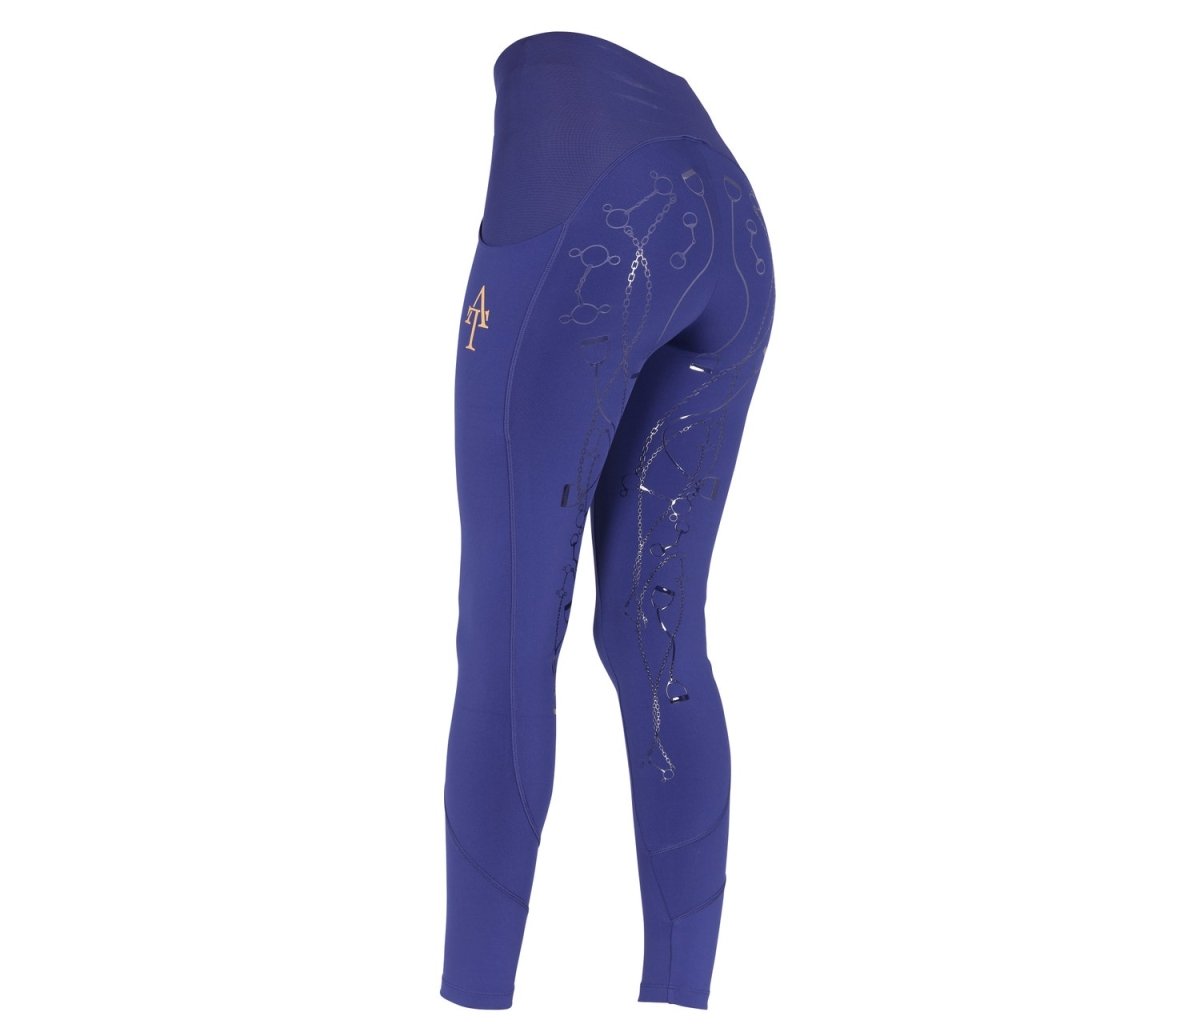 Aubrion SS24 Team Riding Tights - Young Rider - Navy - 11/12 Years